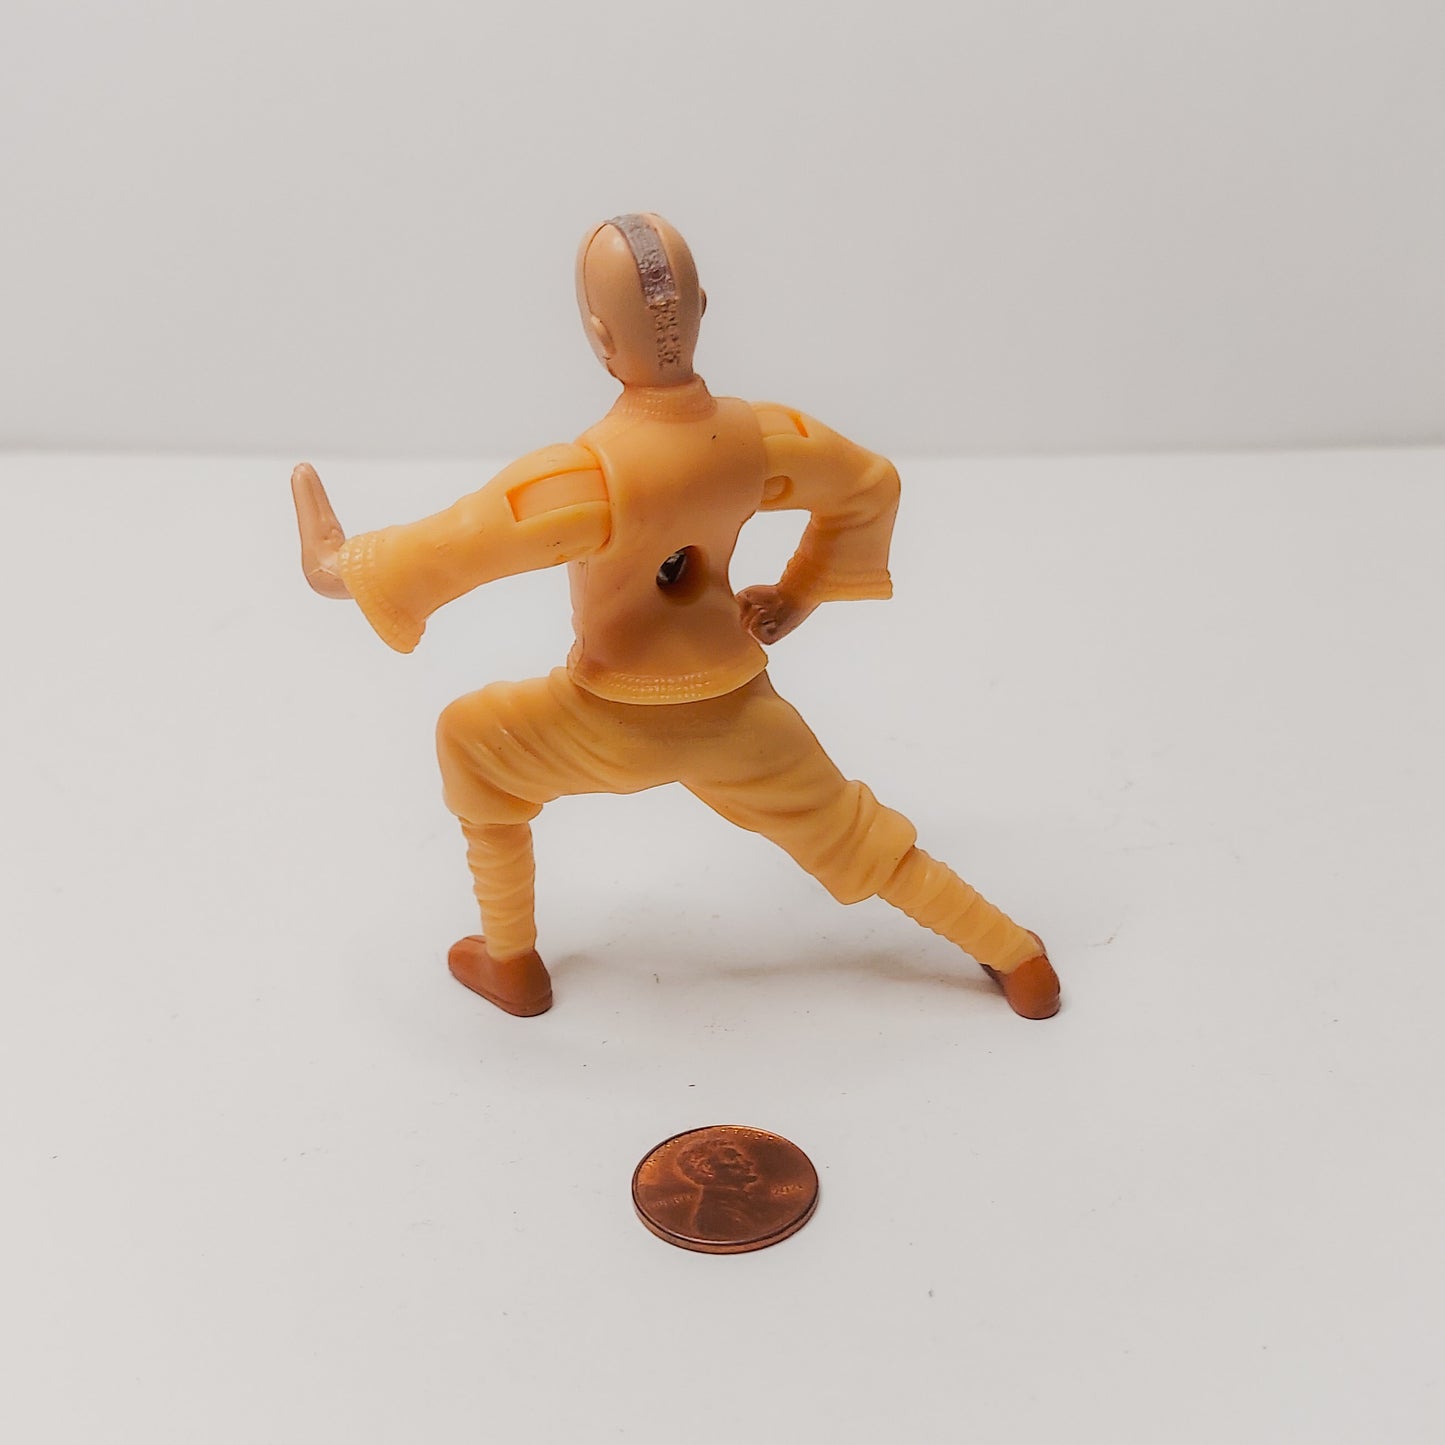 2010 McDonalds Happy Meal Avatar the Last Air Bender Collectible Toy Only